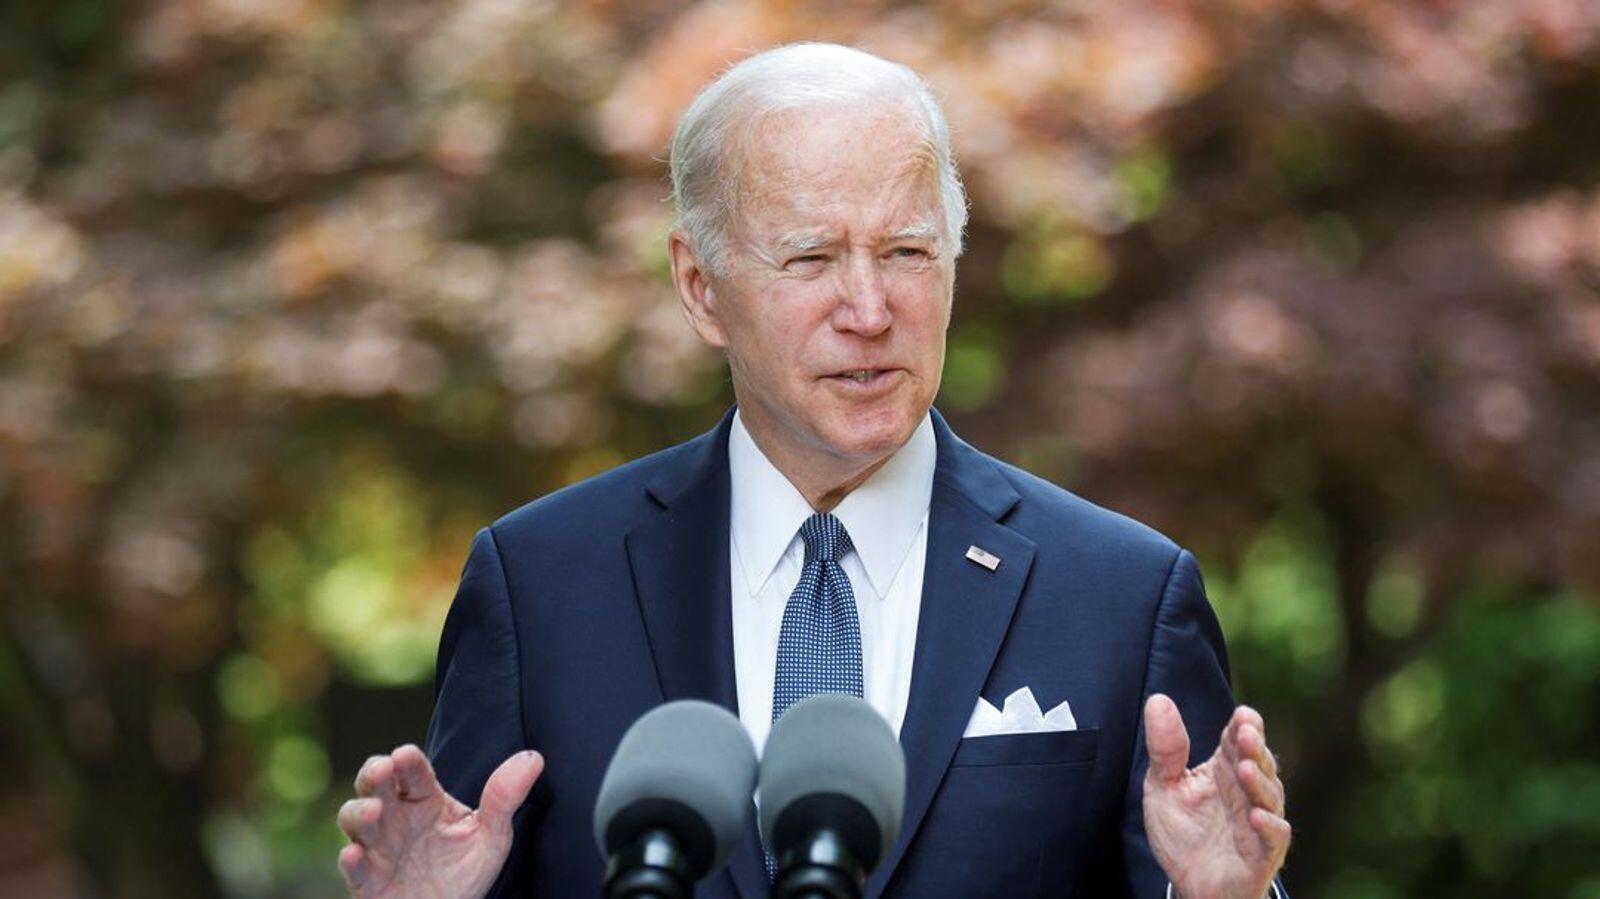 Biden says ‘hello’ to North Korea’s Kim amid tensions over weapons tests - News